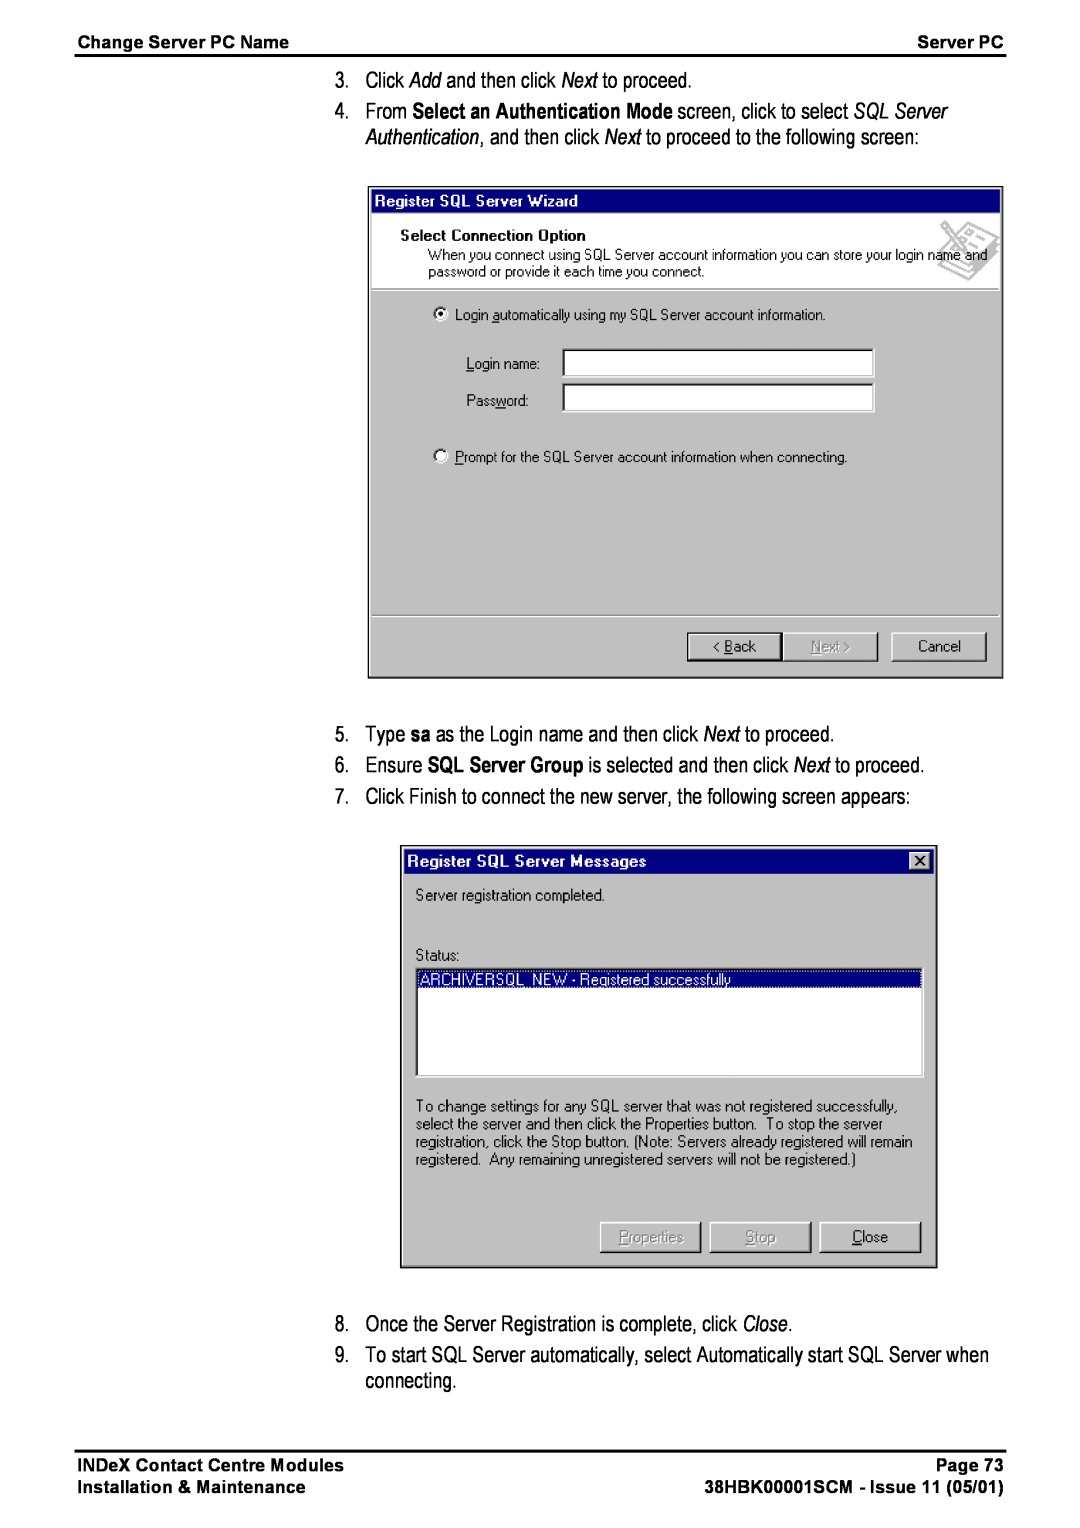 Avaya 38HBK00001SCM manual Click Add and then click Next to proceed 